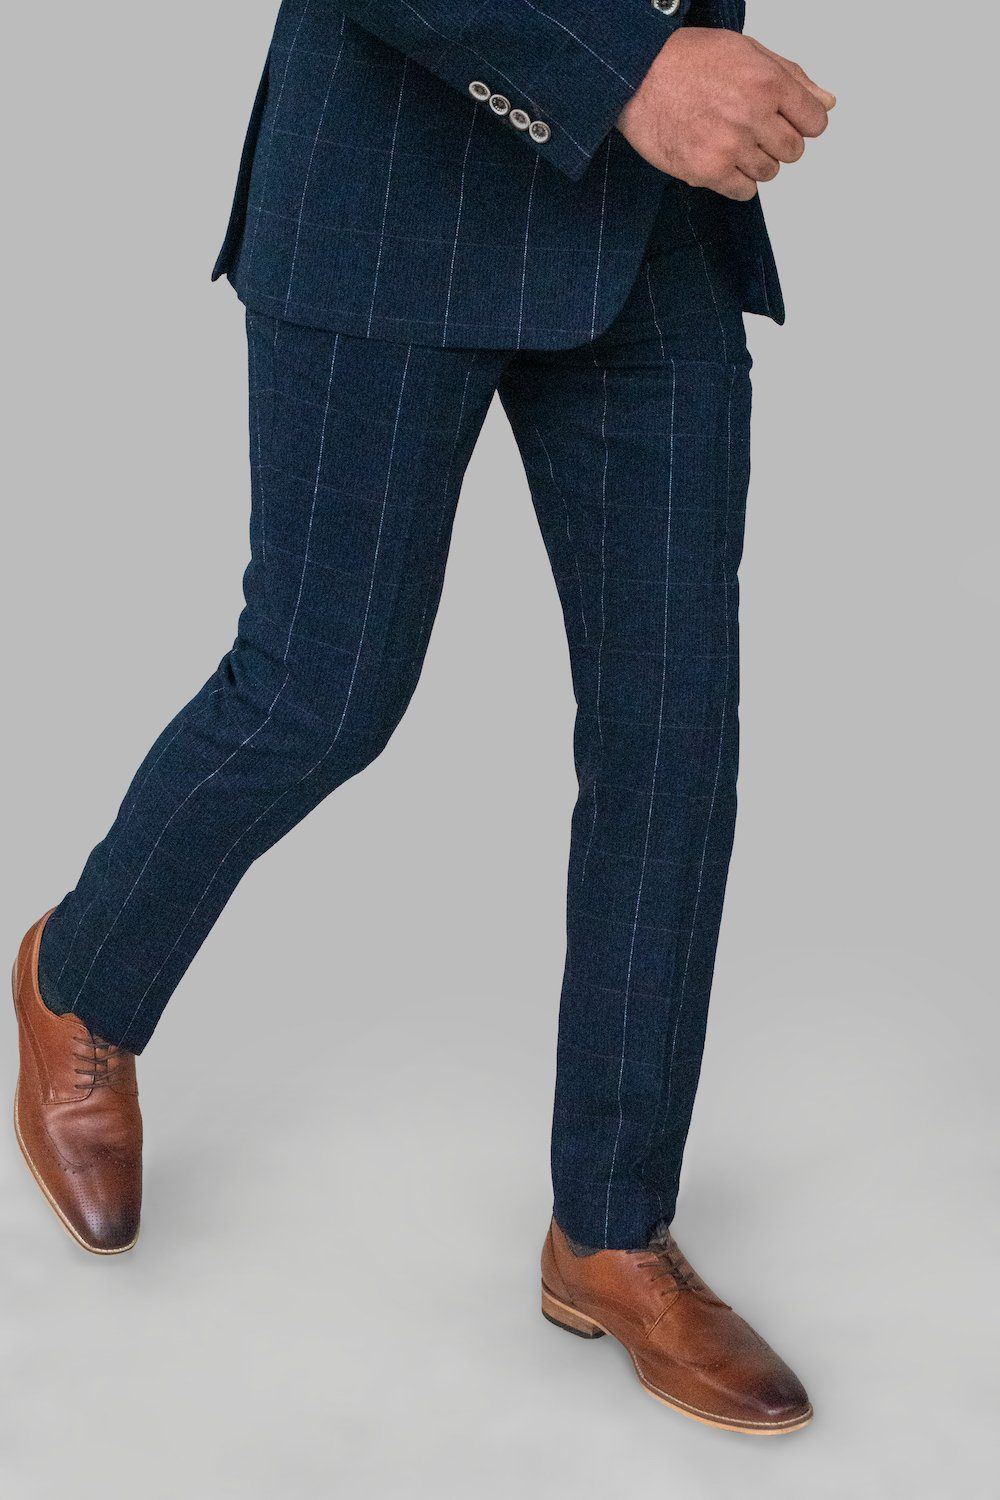 Navy Check Tweed Trousers - STOCK CLEARANCE - Trousers - 30R - THREADPEPPER